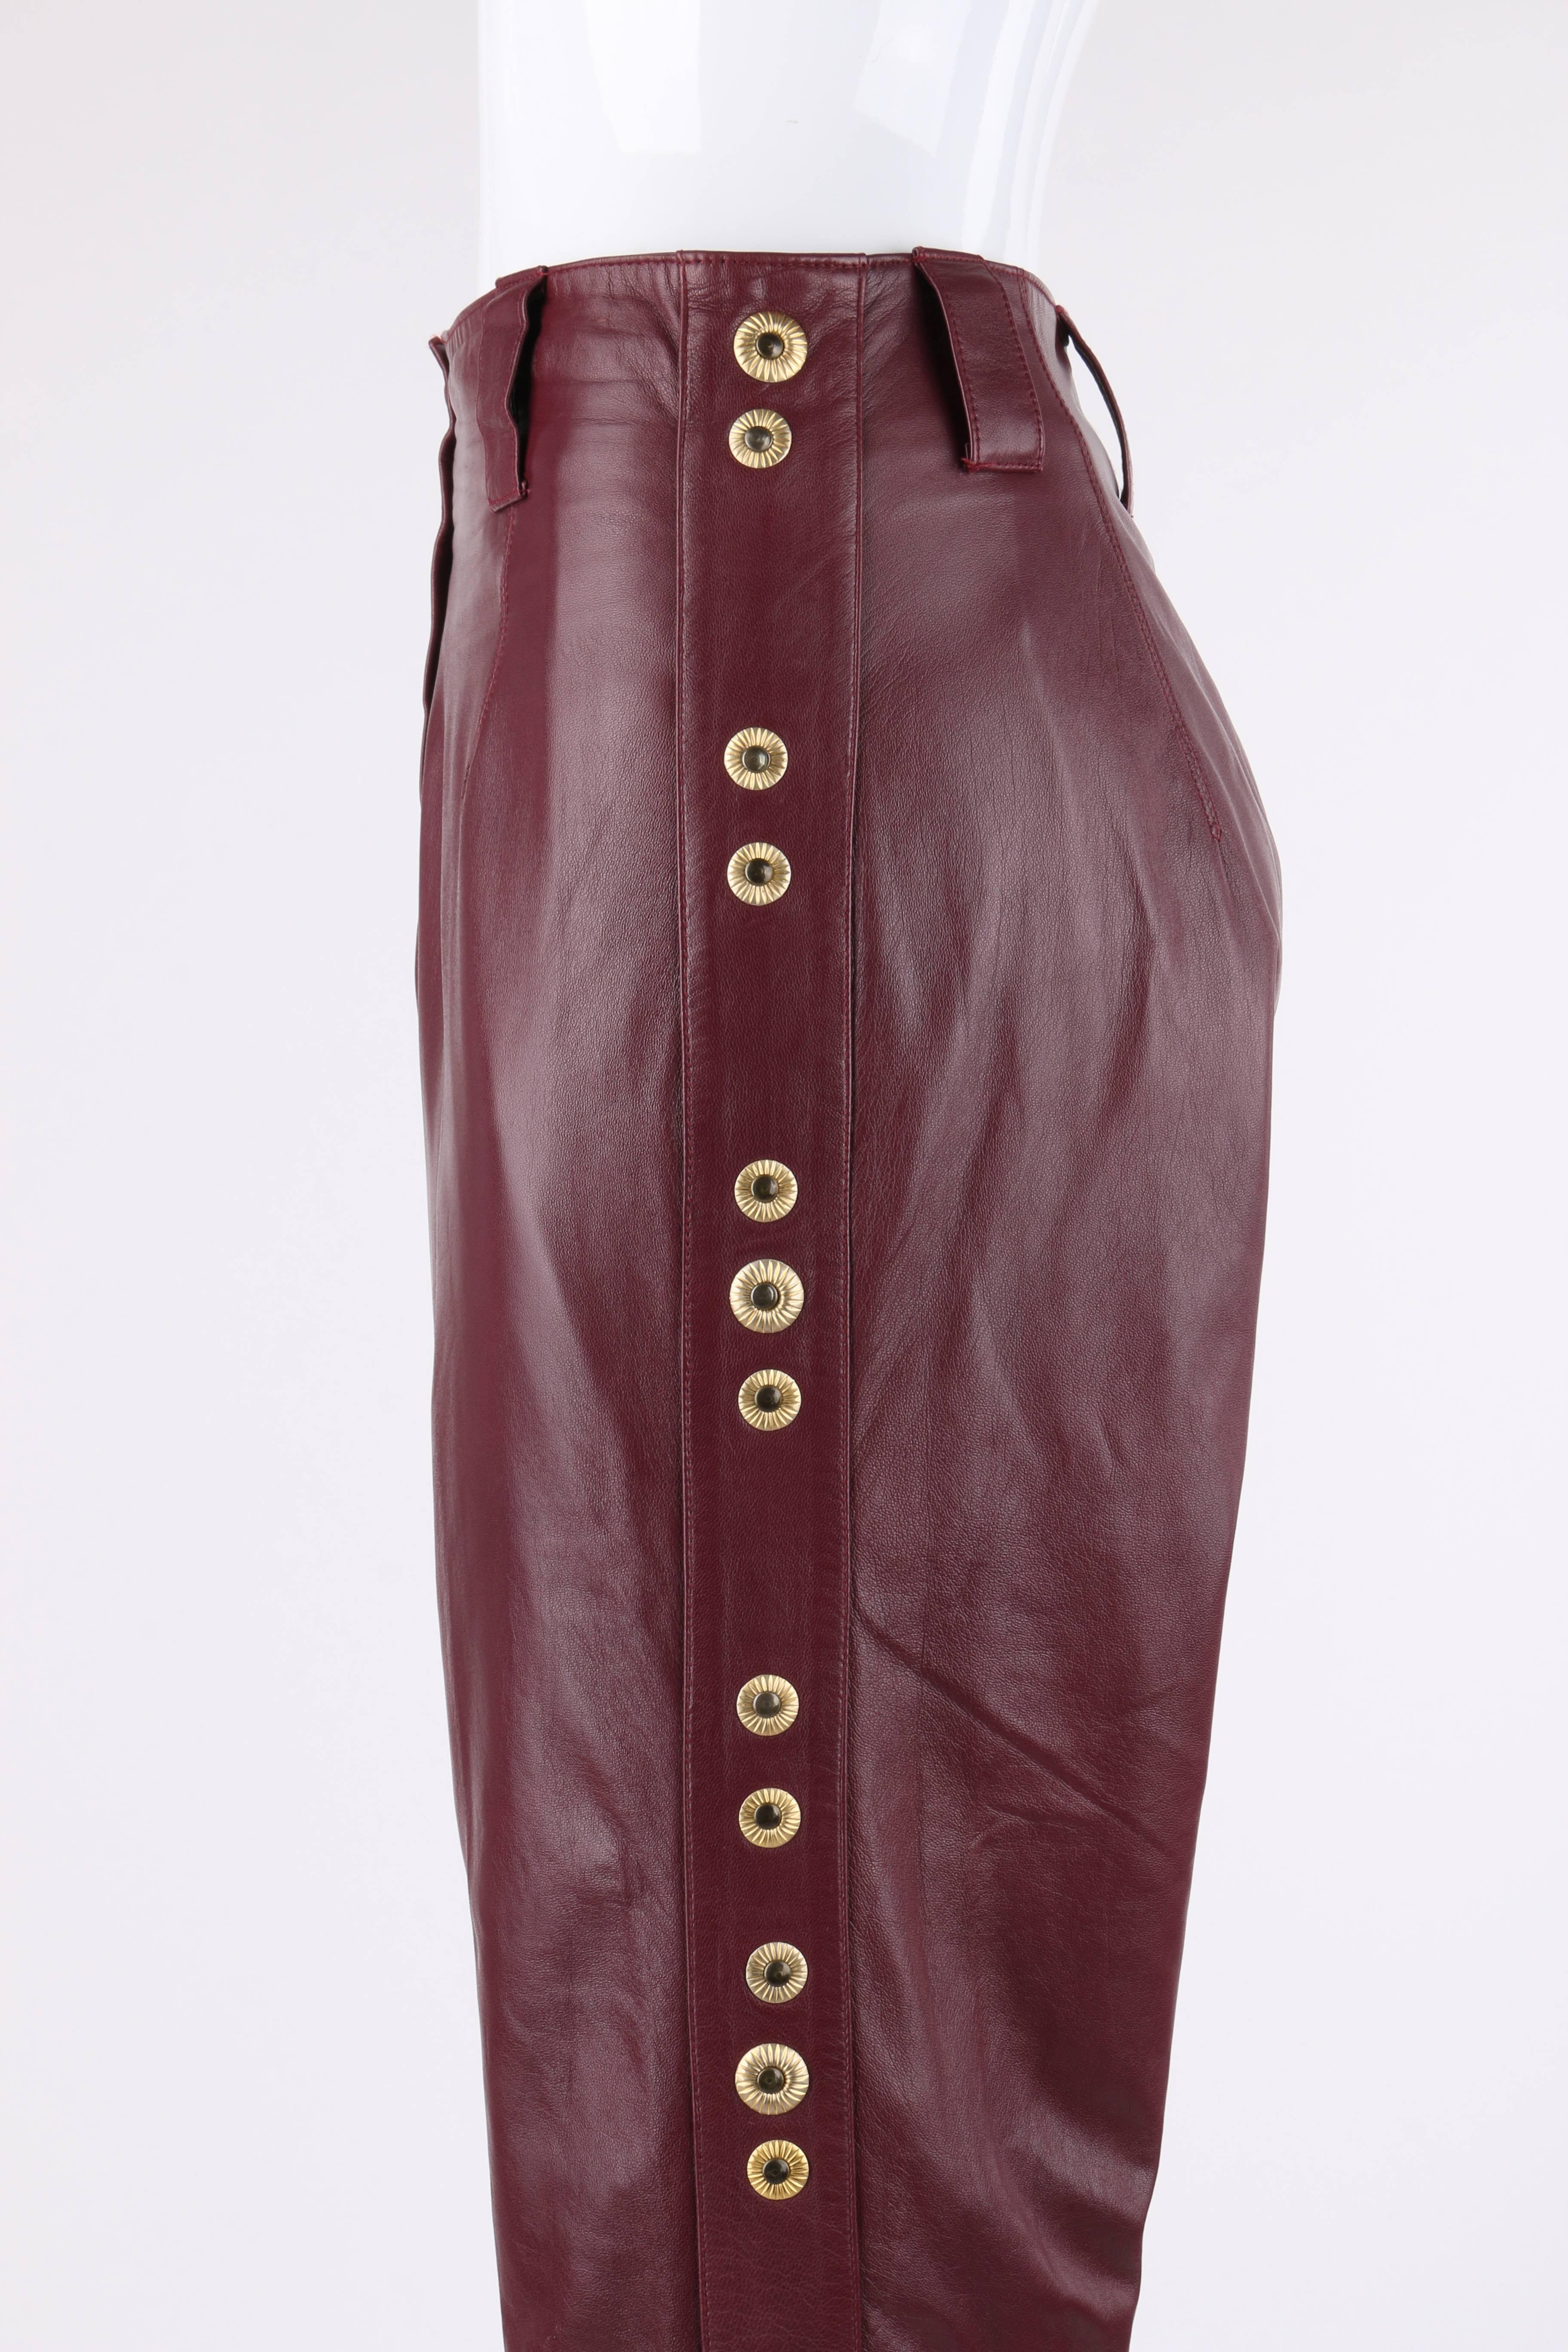 Women's ROBERTO CAVALLI Burgundy Leather Studded Embellished Ankle Length Pants Trousers